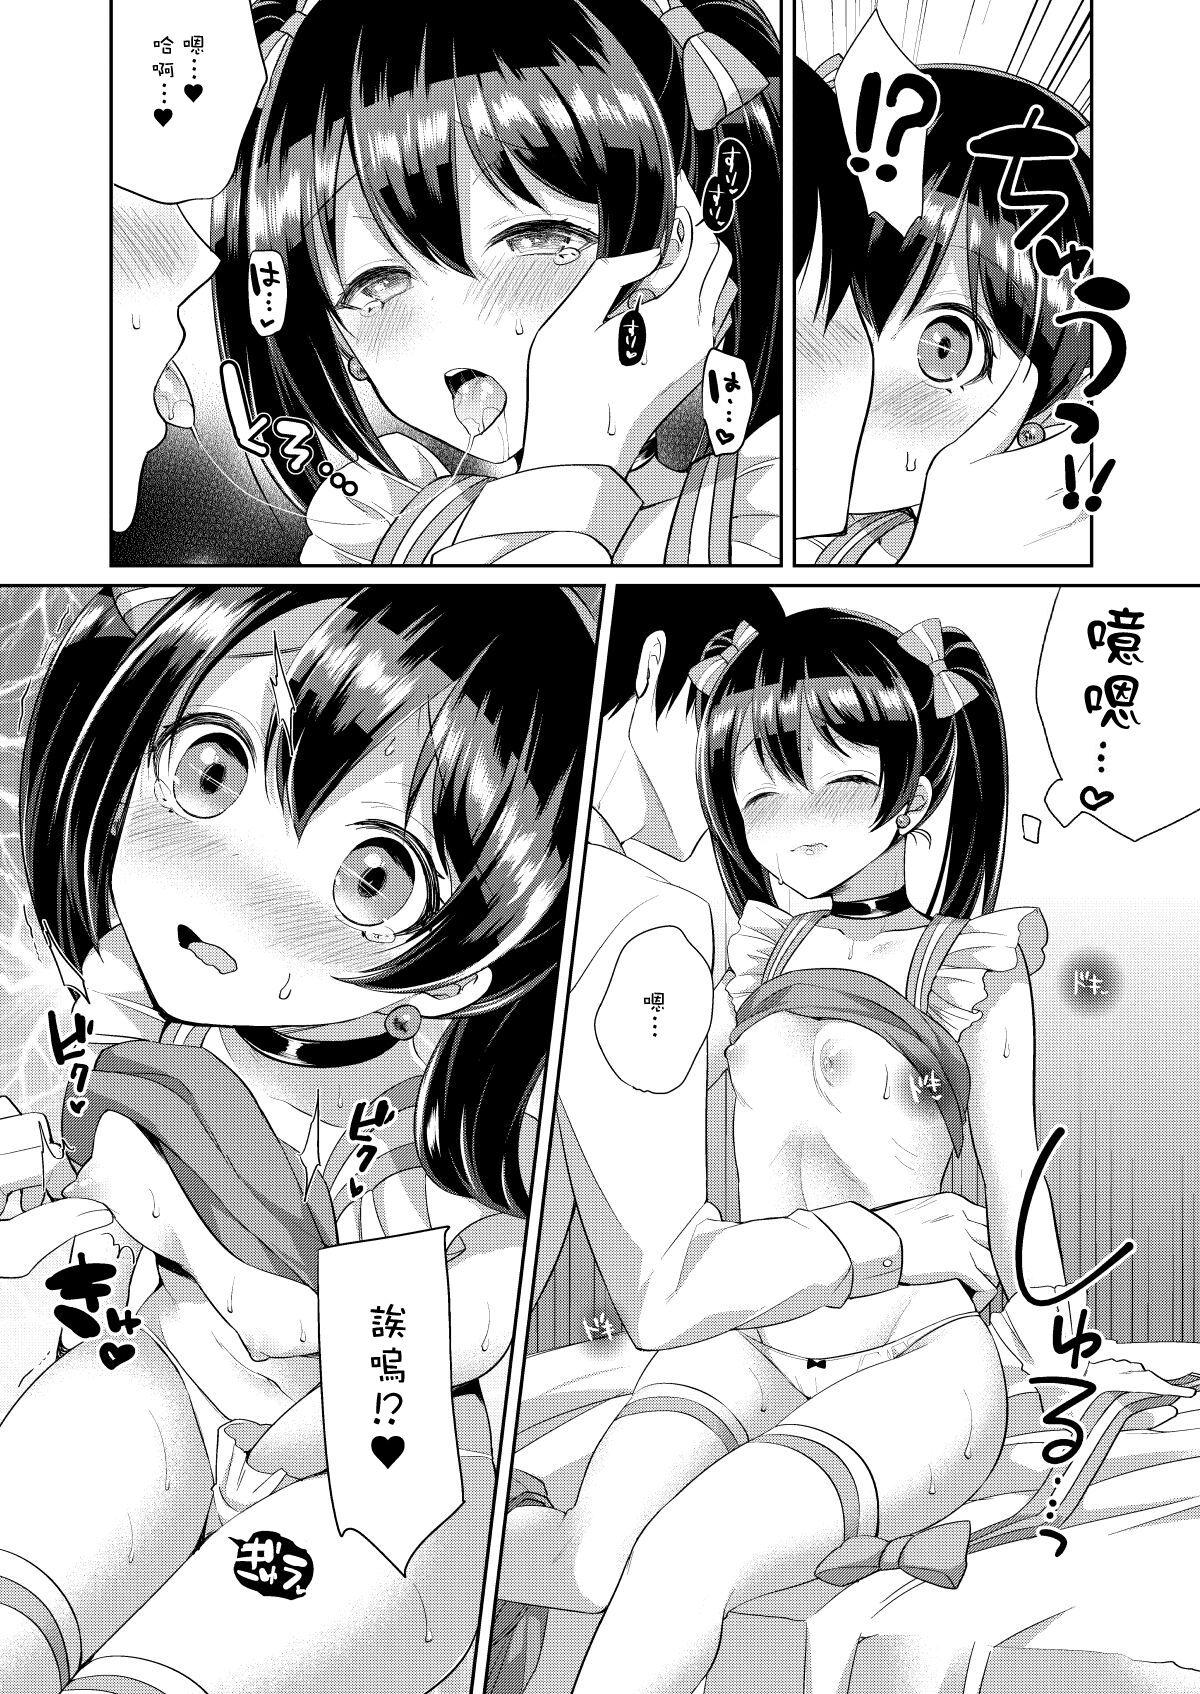 Rough Porn にこといちゃラブエッチ - Love live Free Amateur - Page 3